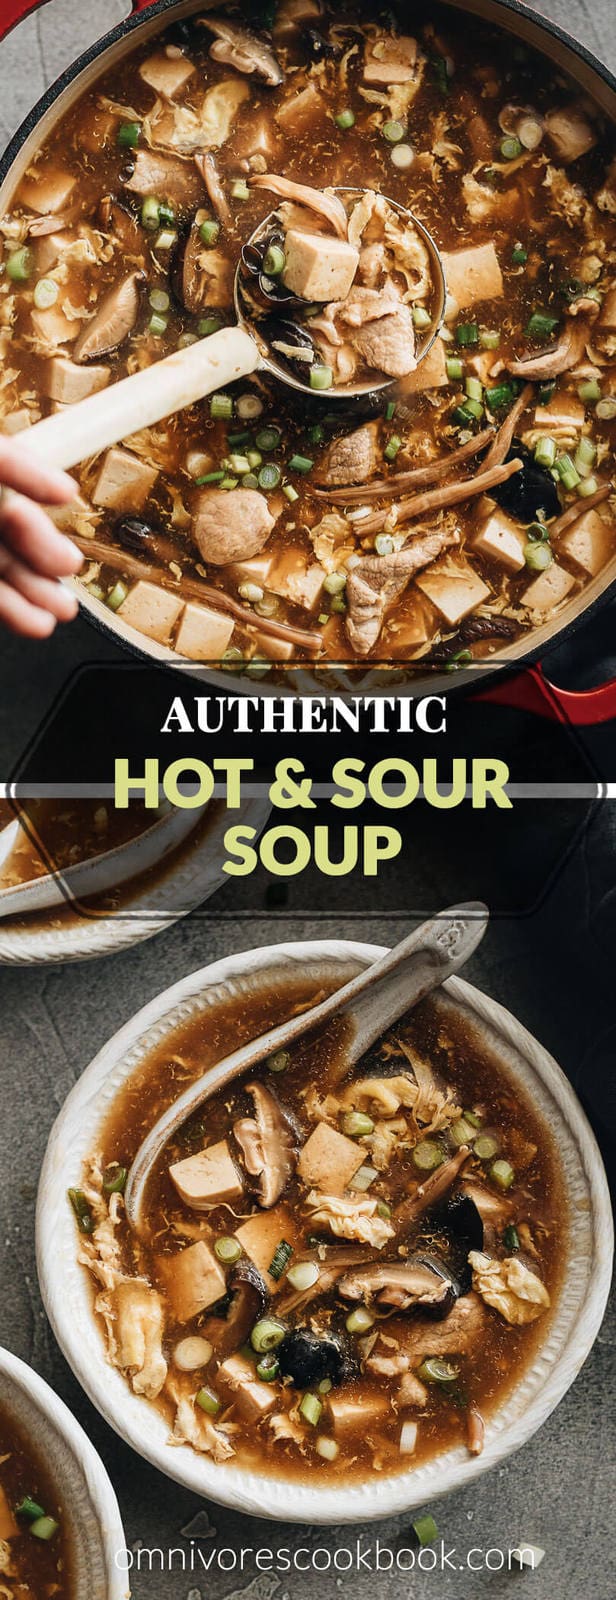 Hot and Sour Soup (酸辣汤) - Authentic Chinese restaurant-style hot and sour soup made easy. The hearty broth is loaded with veggies and is so satisfying and healthy. The recipe includes notes on how to tweak the soup into a vegetarian one and to use whatever veggies you have on hand. #takeout #recipes #traditional